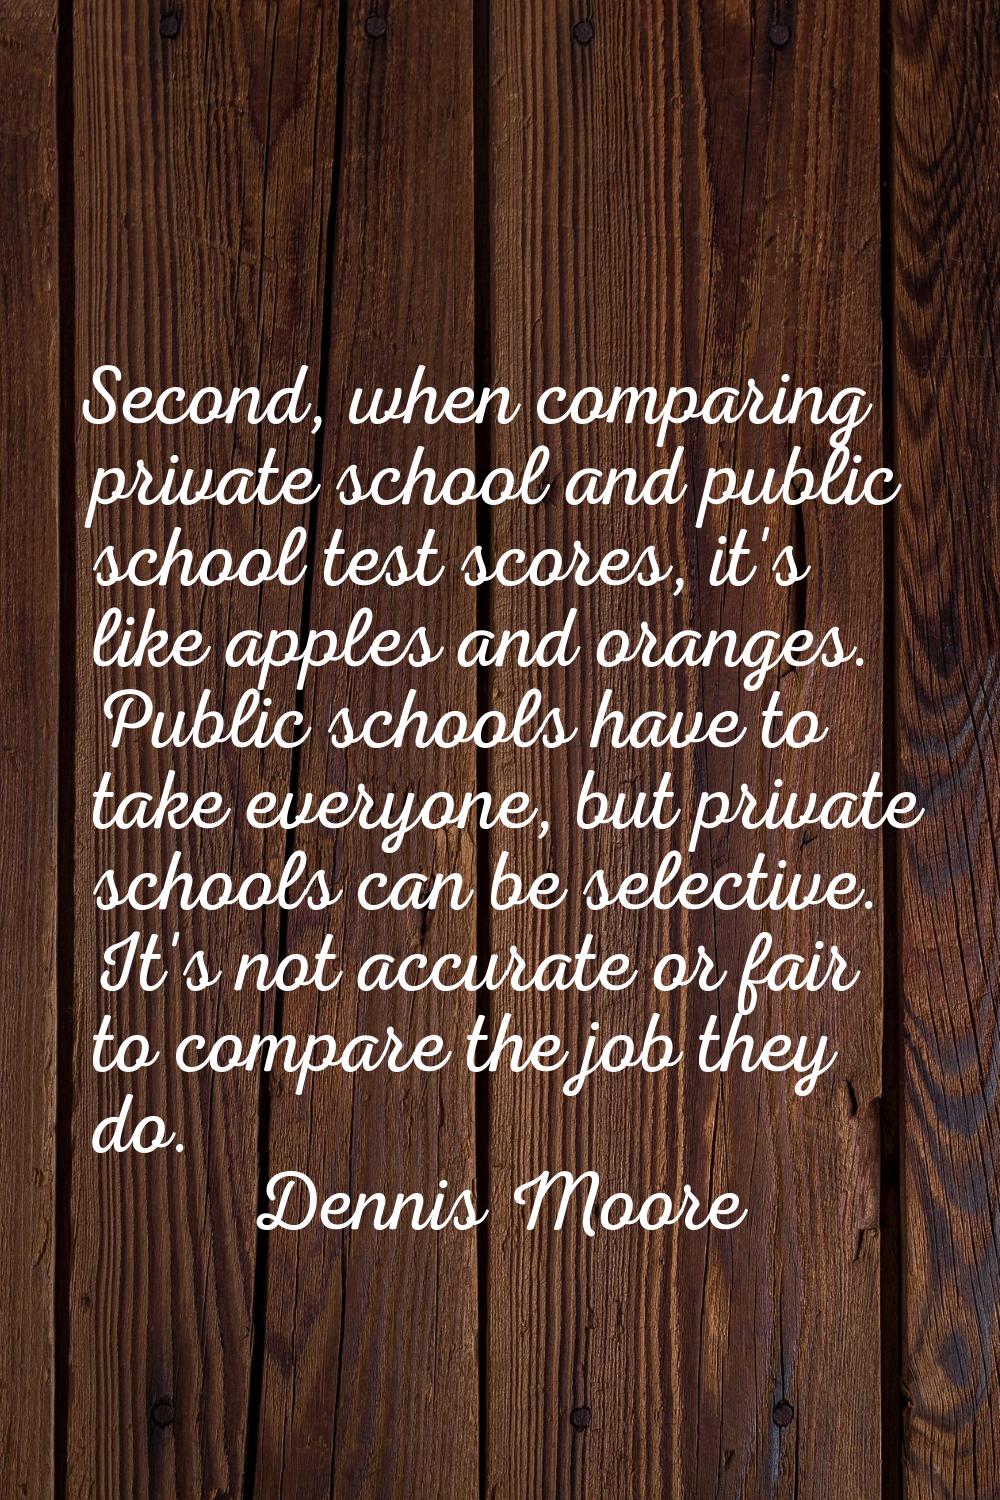 Second, when comparing private school and public school test scores, it's like apples and oranges. 